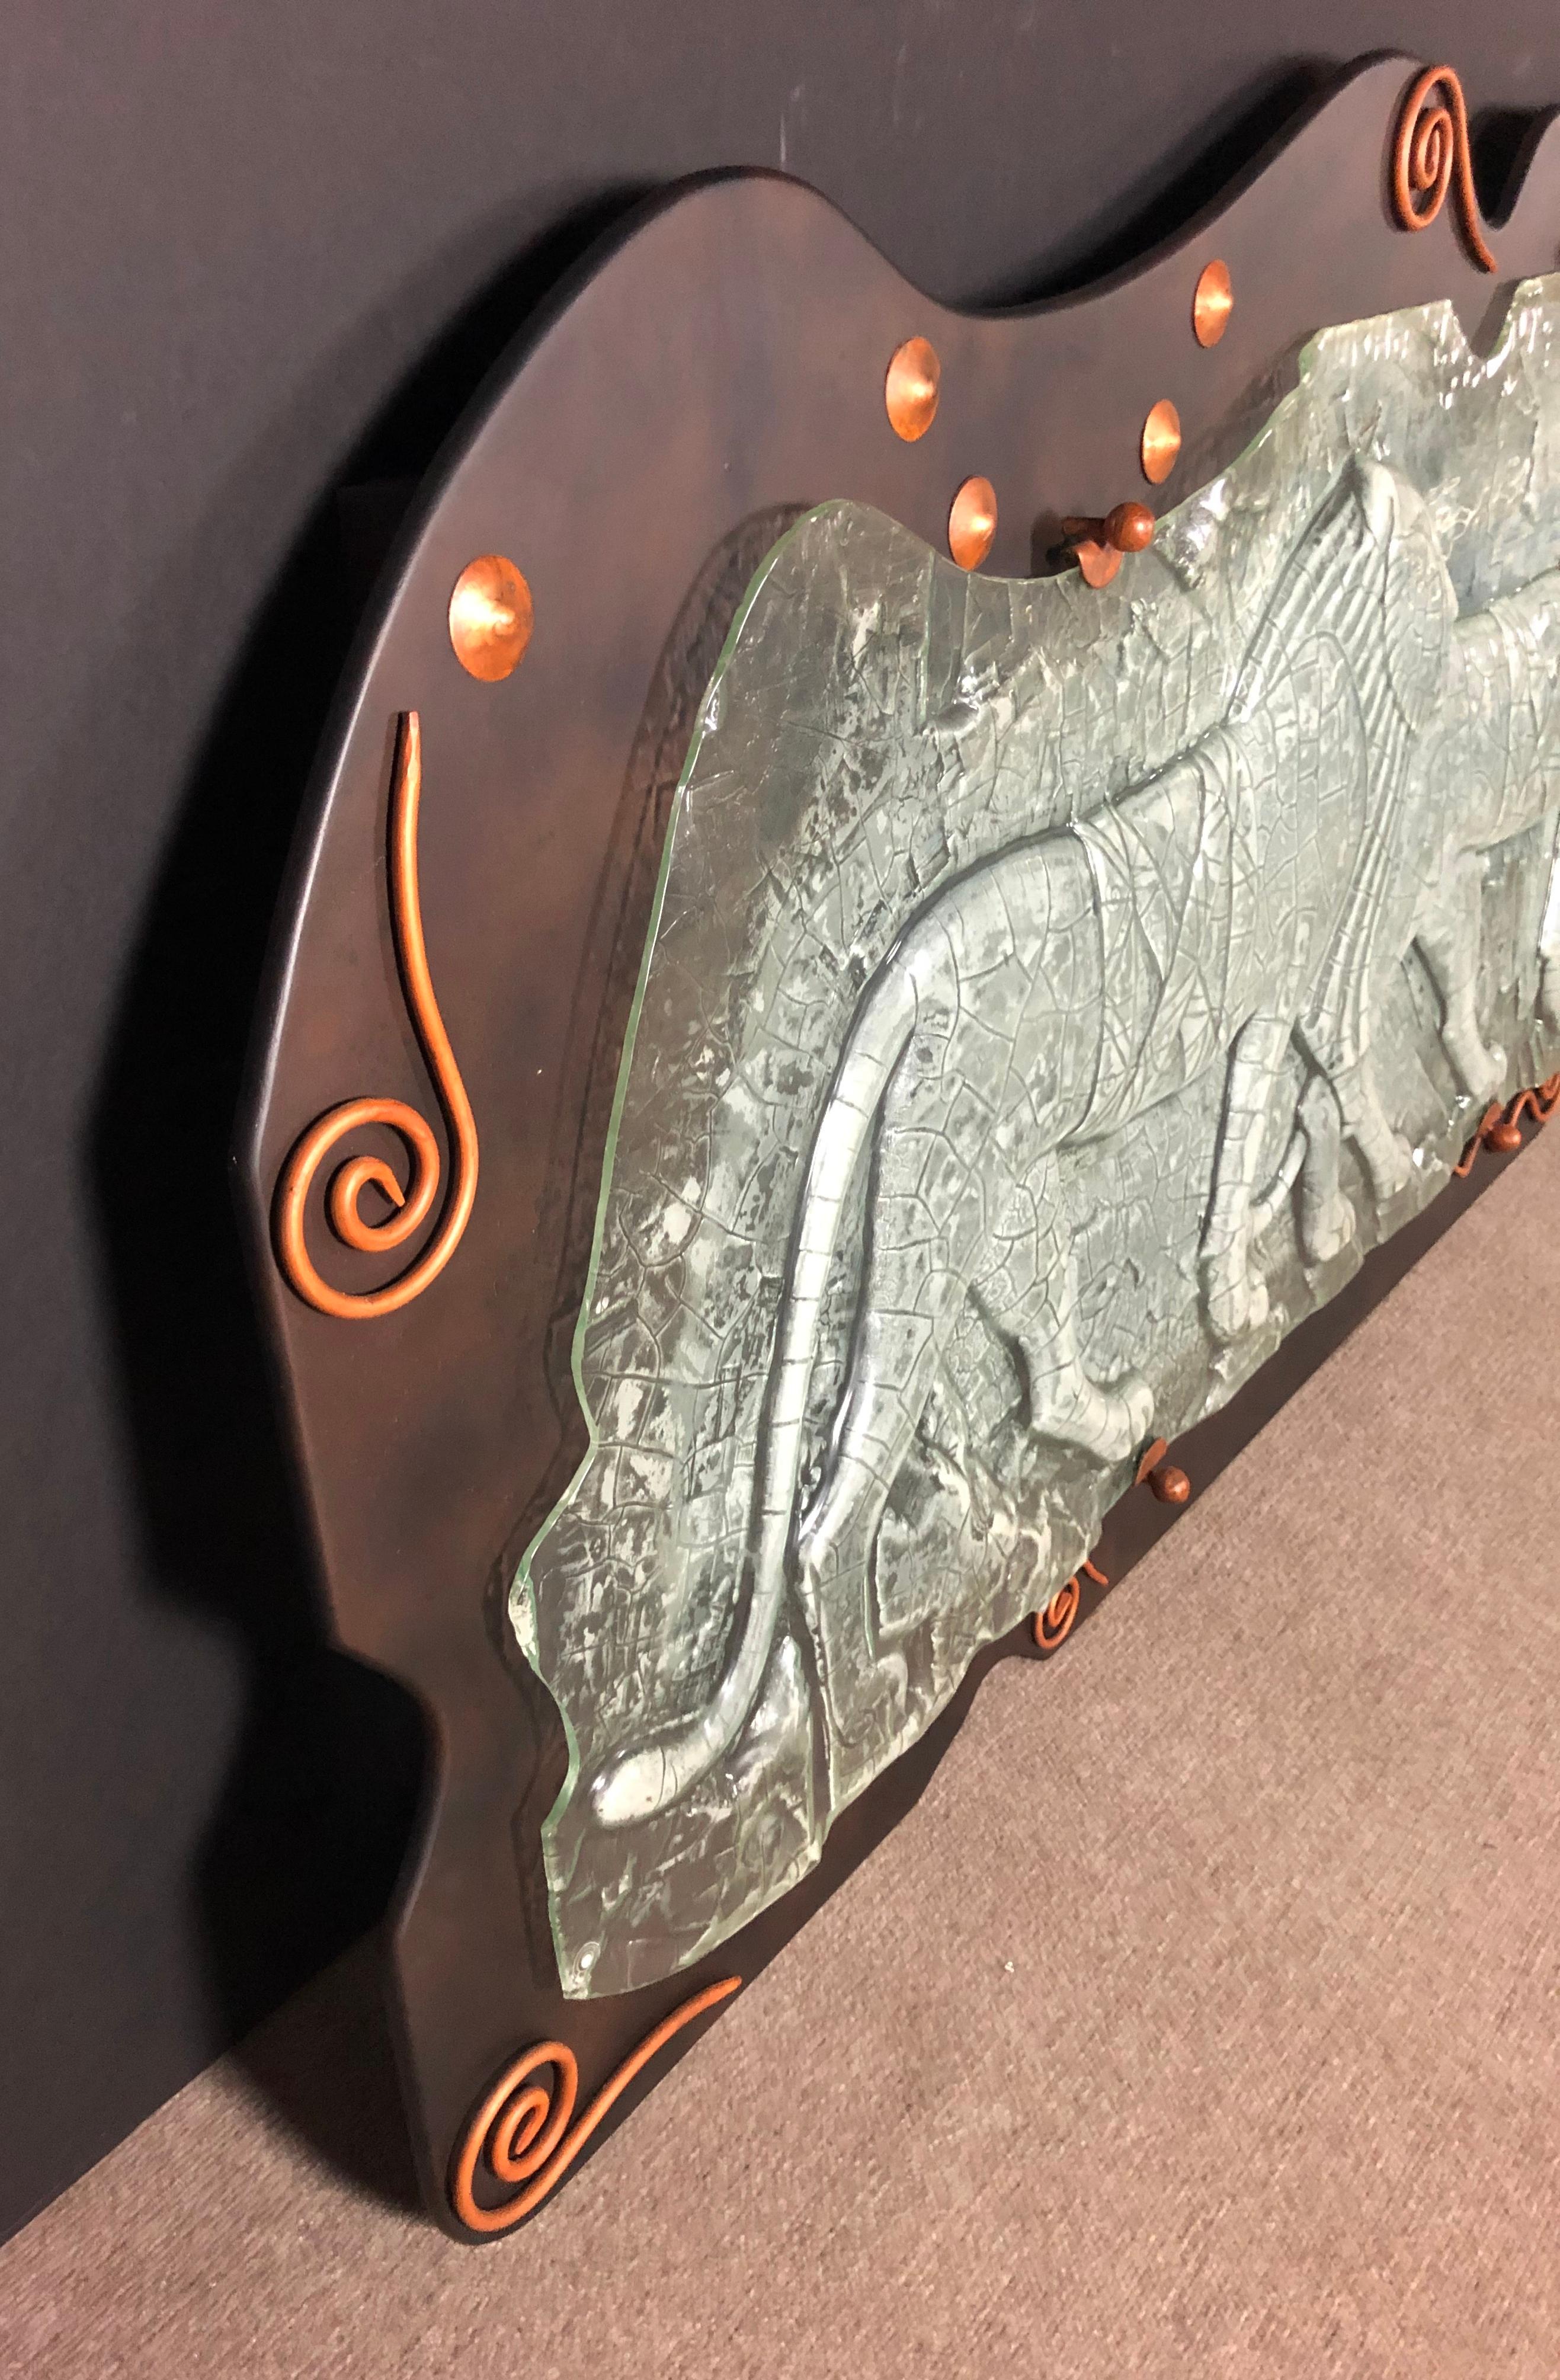 Mexican Luminous Glass Relief Wall Sculpture